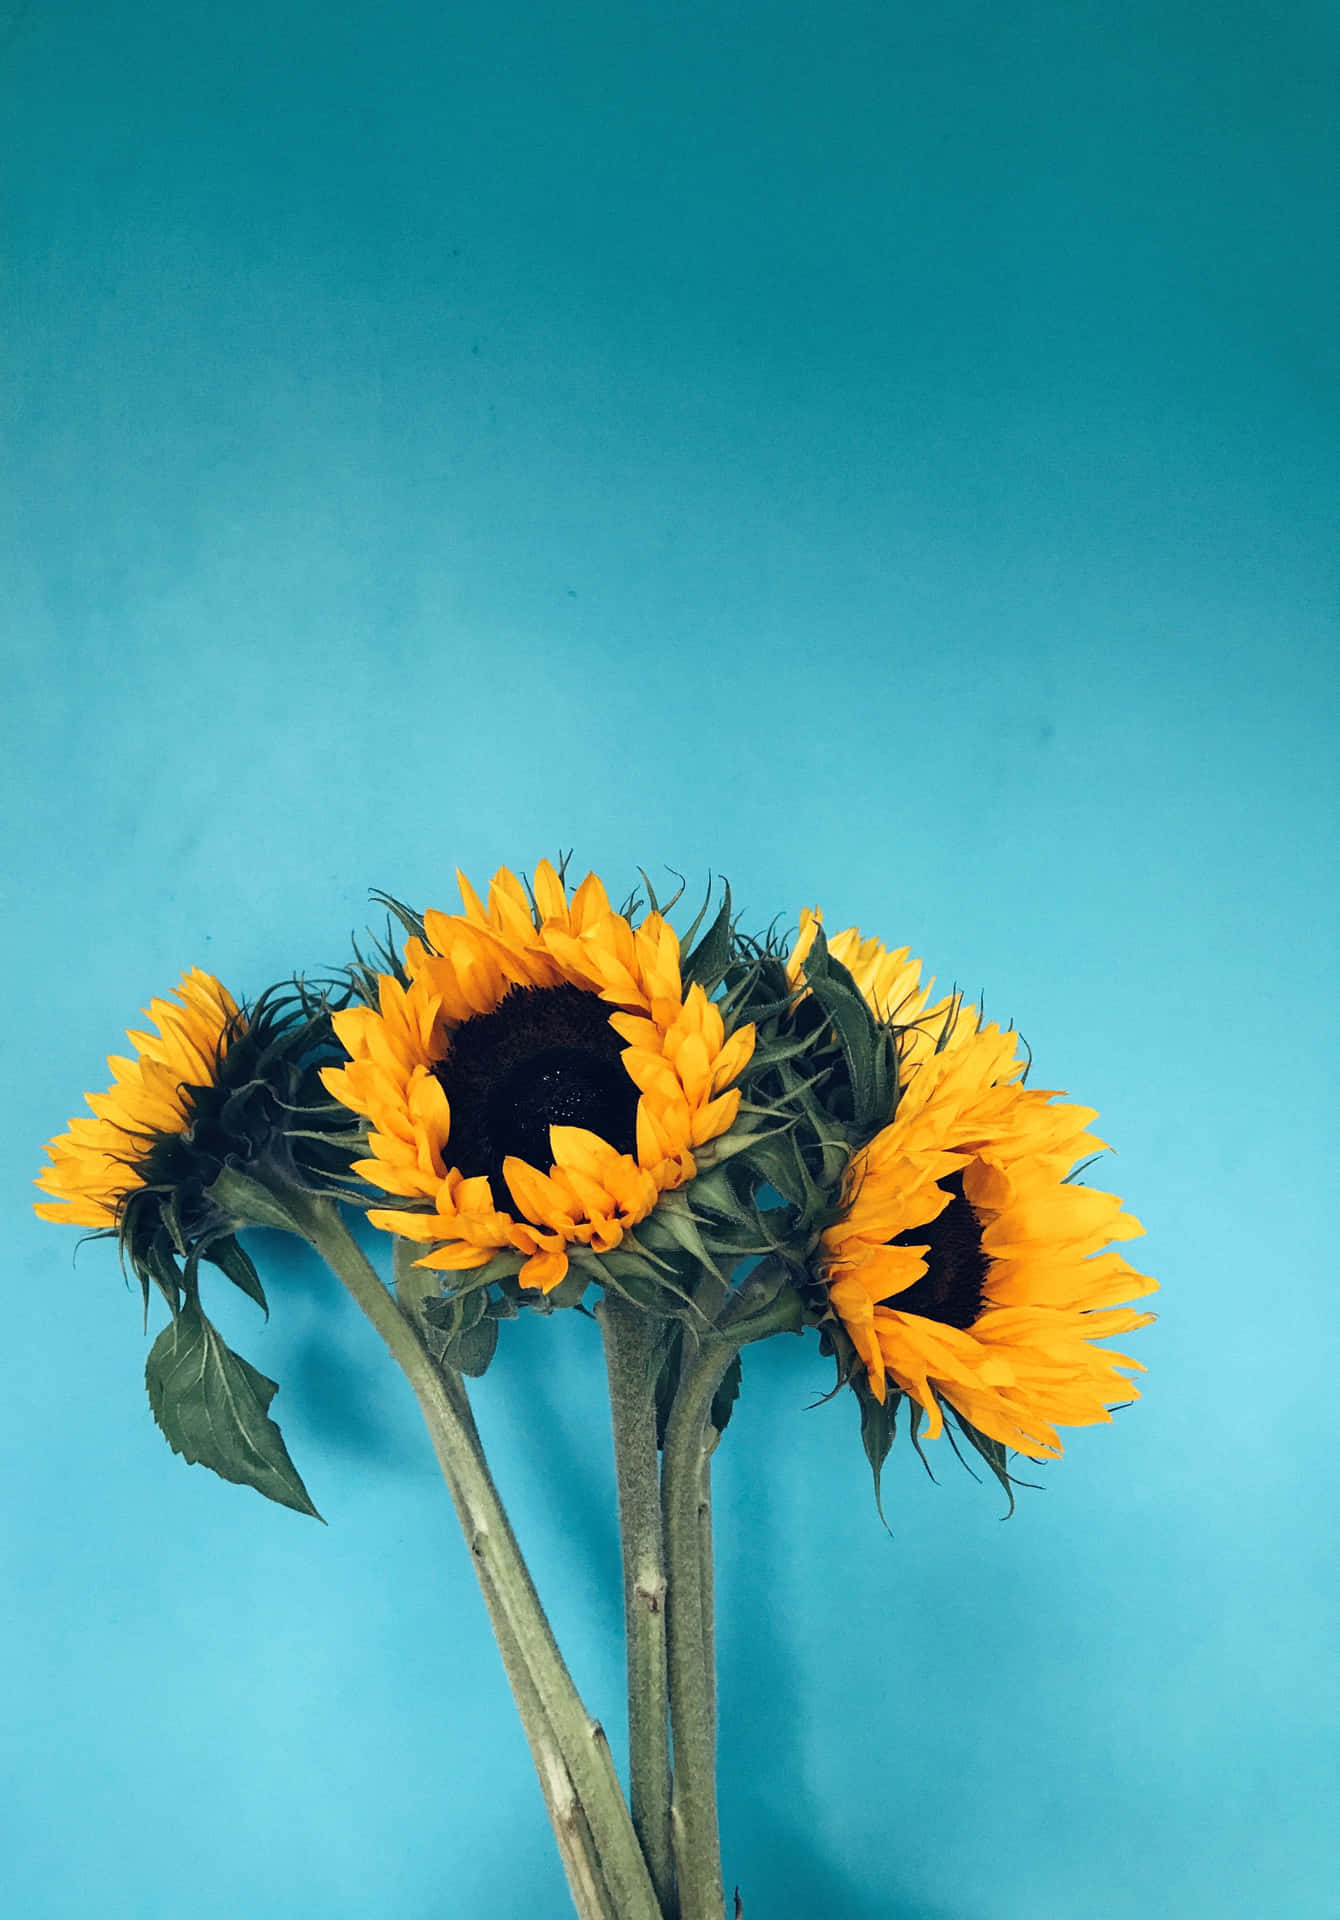 A Vase With Sunflowers Wallpaper